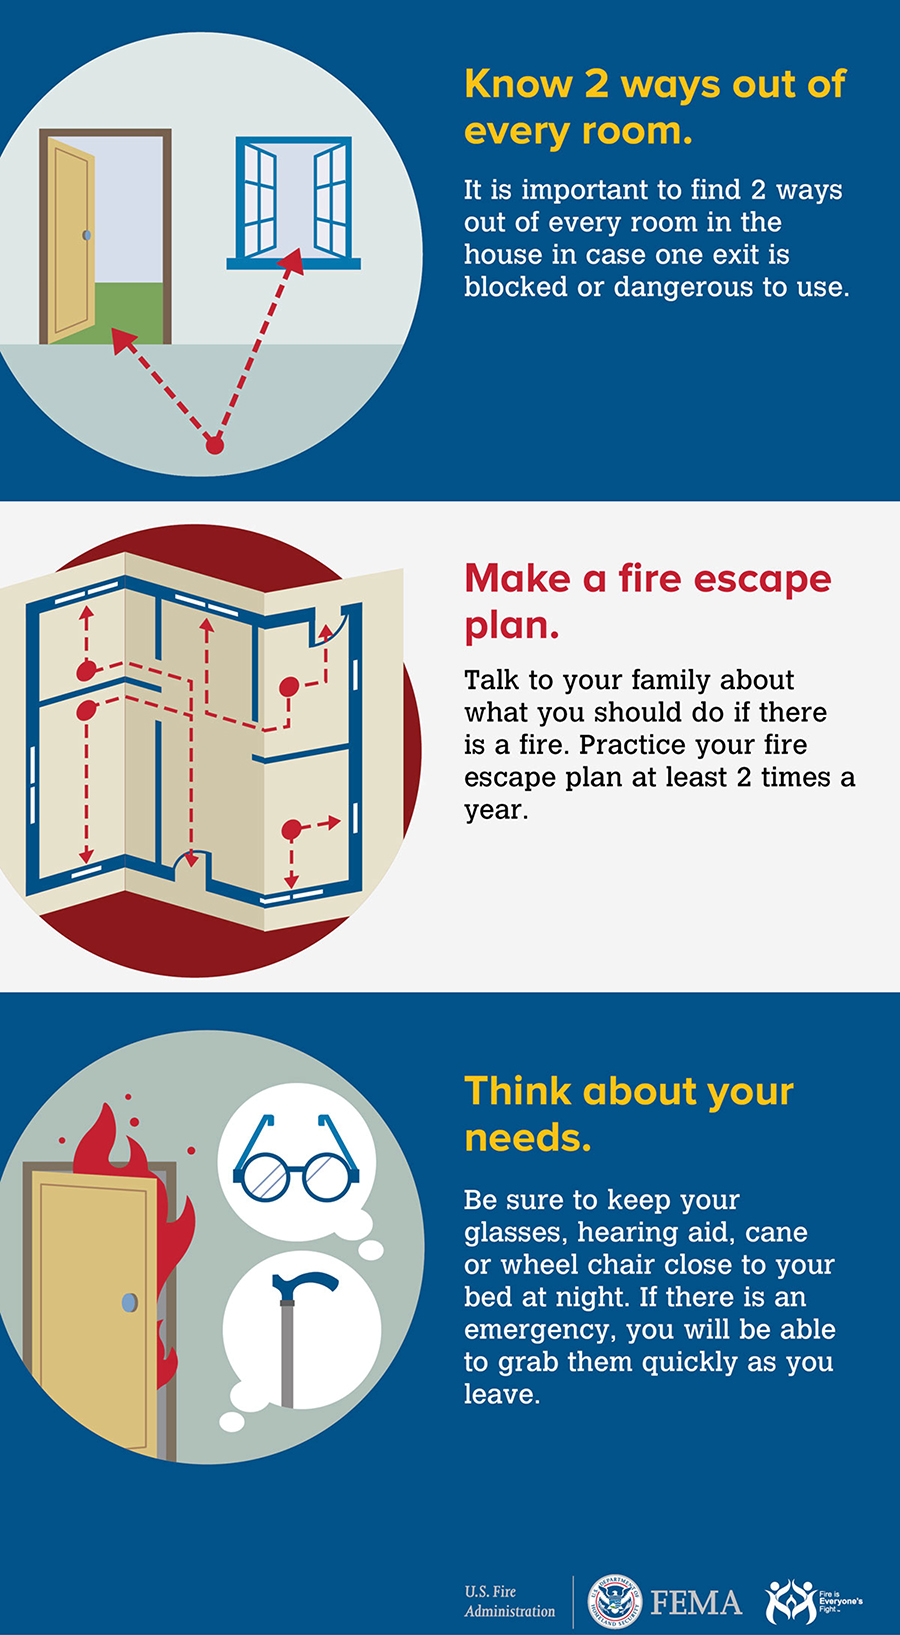 Before a wildfire, make sure you know two ways out of every room, make a fire escape plan and think about your needs such as glasses and hearing aids.